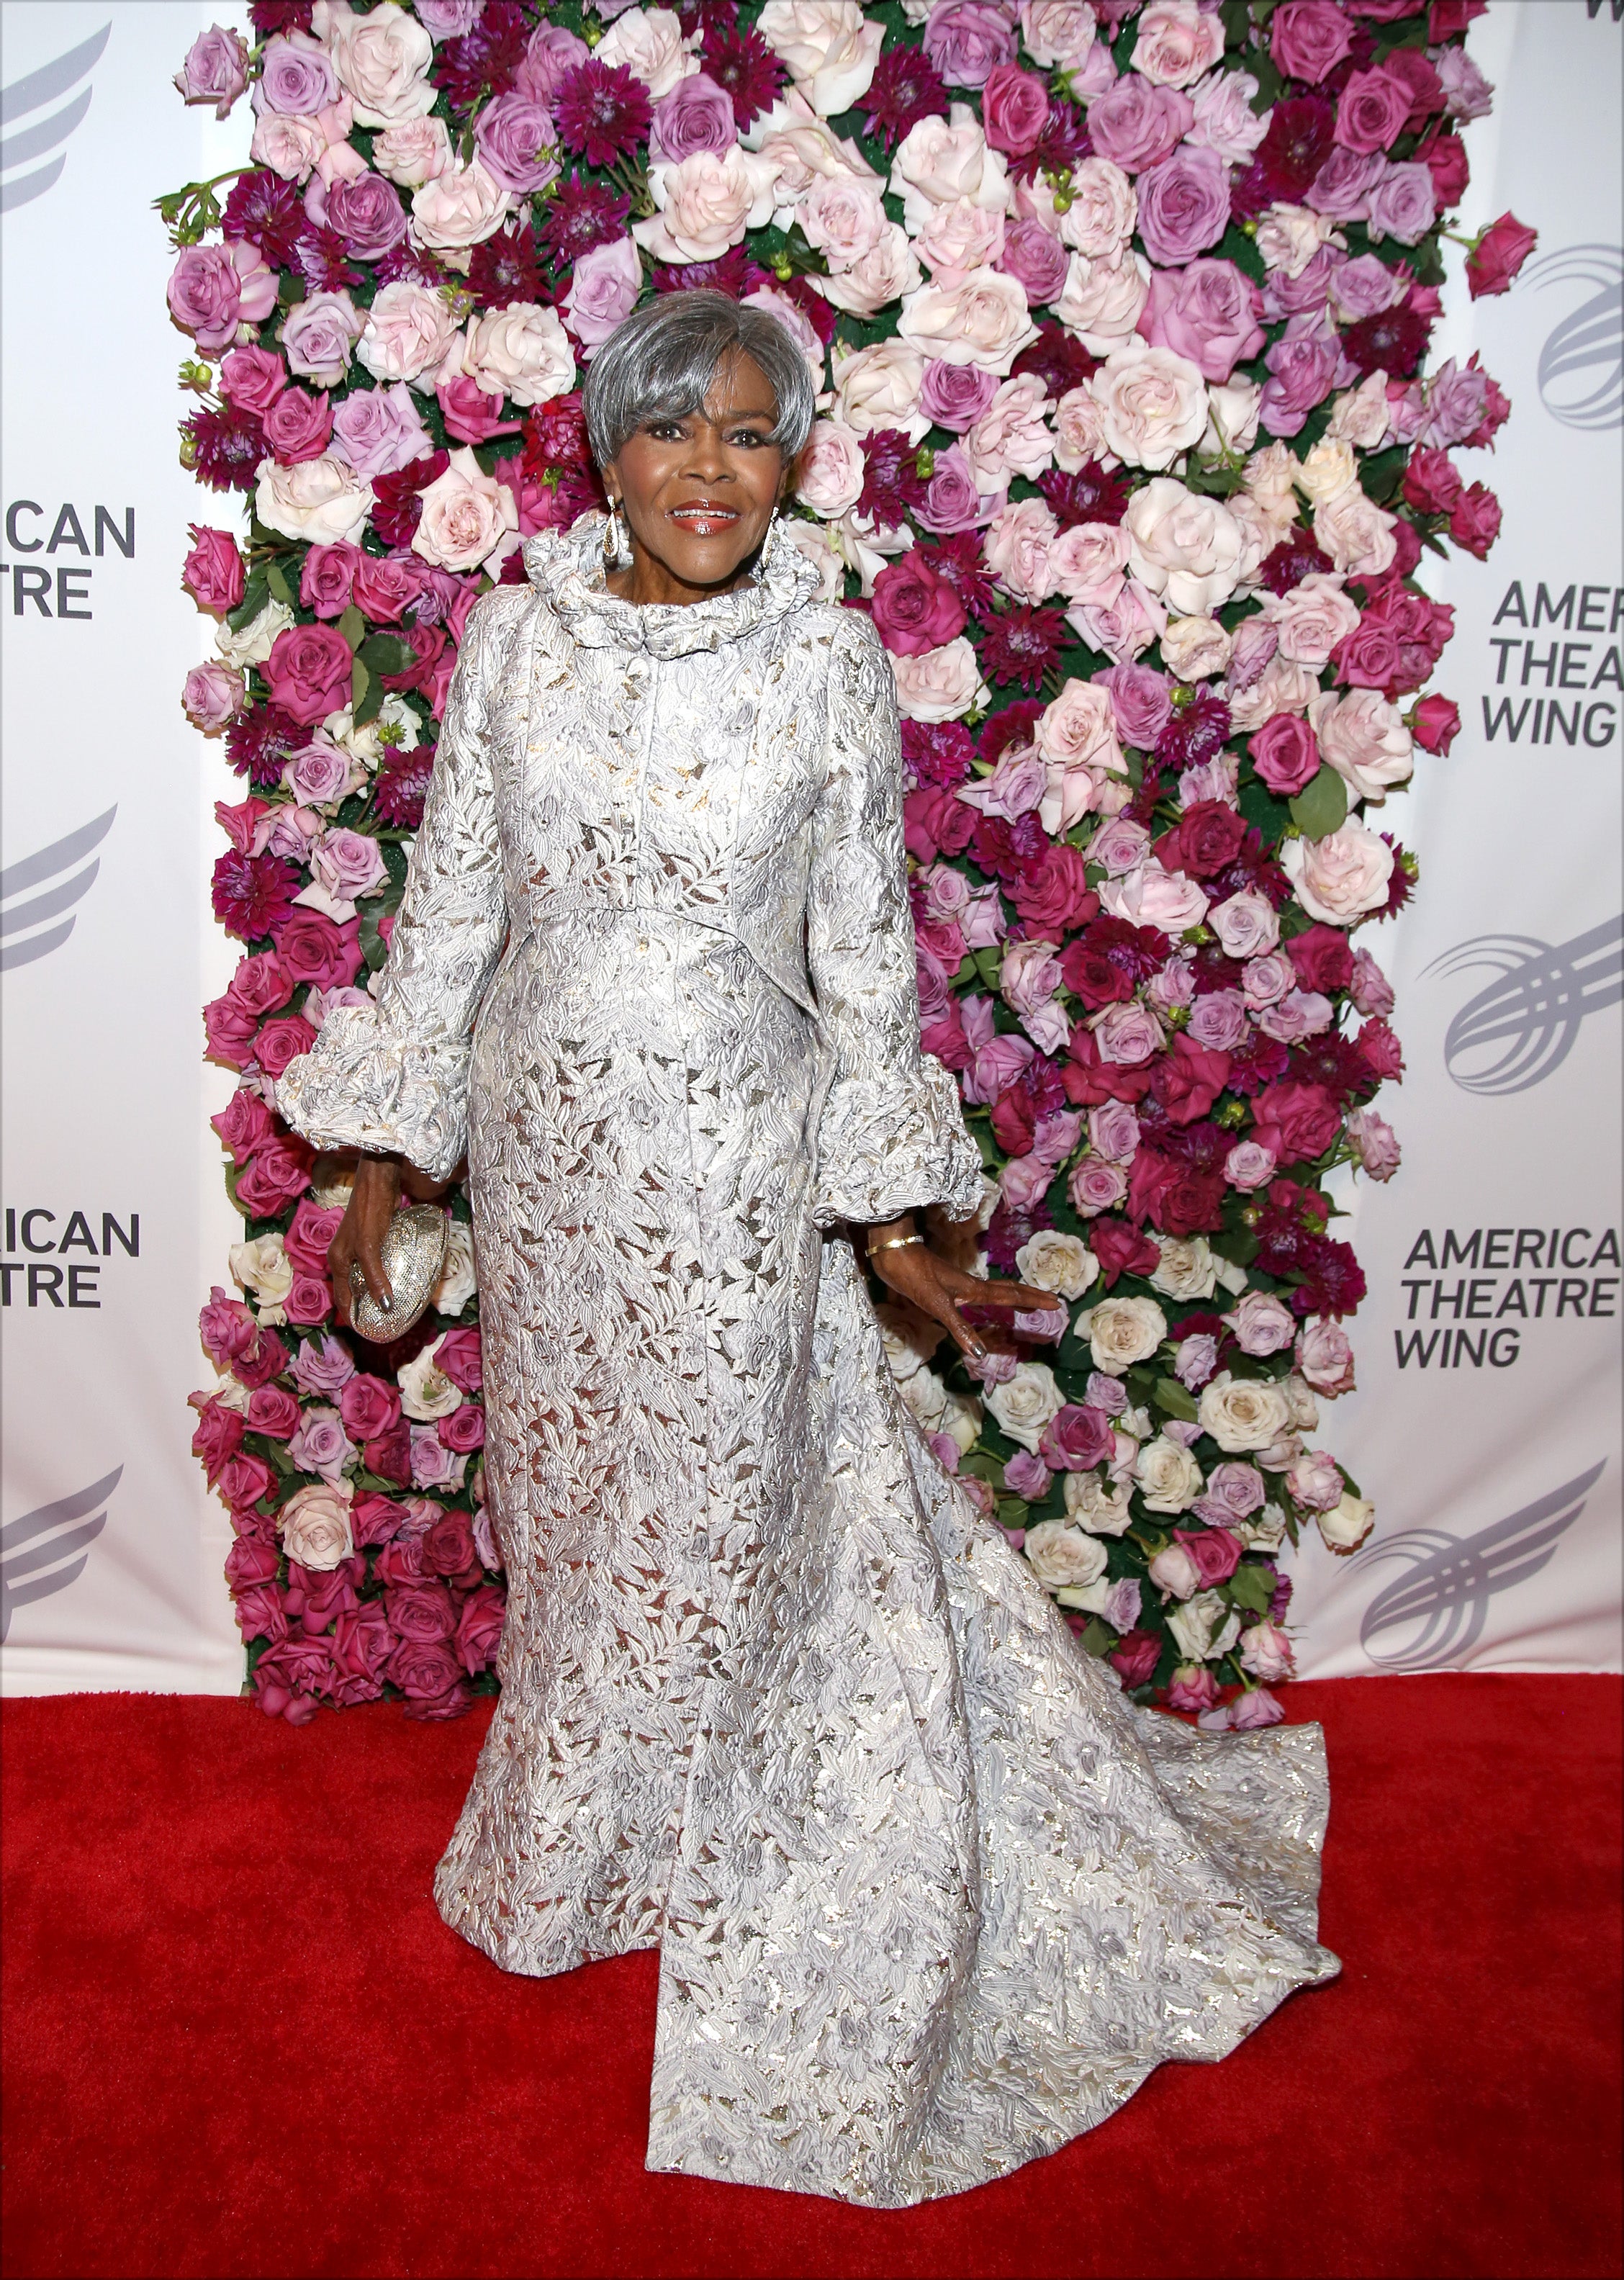 Celebs Support As The Ever Gorgeous Cicely Tyson Is Honored at the 2016 American Theatre Wing Gala
